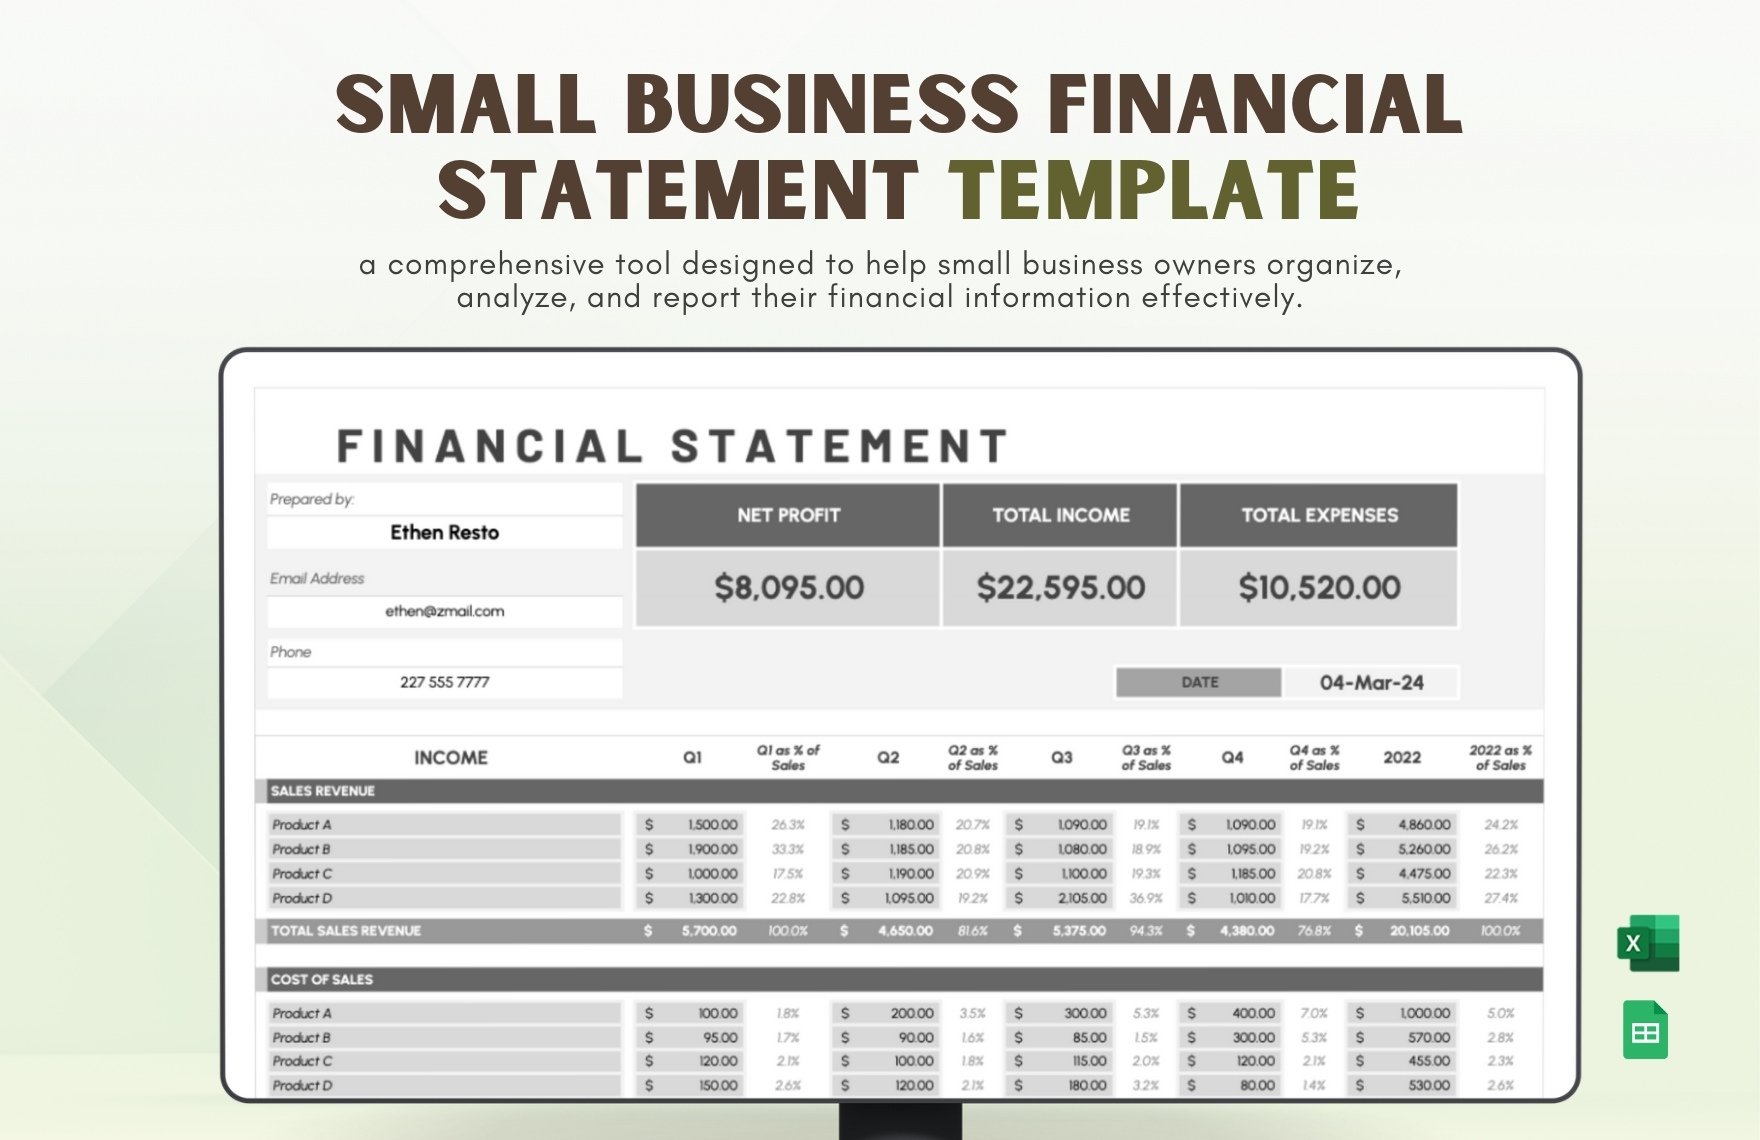 Small Business Financial Statement Template in Excel, Google Sheets